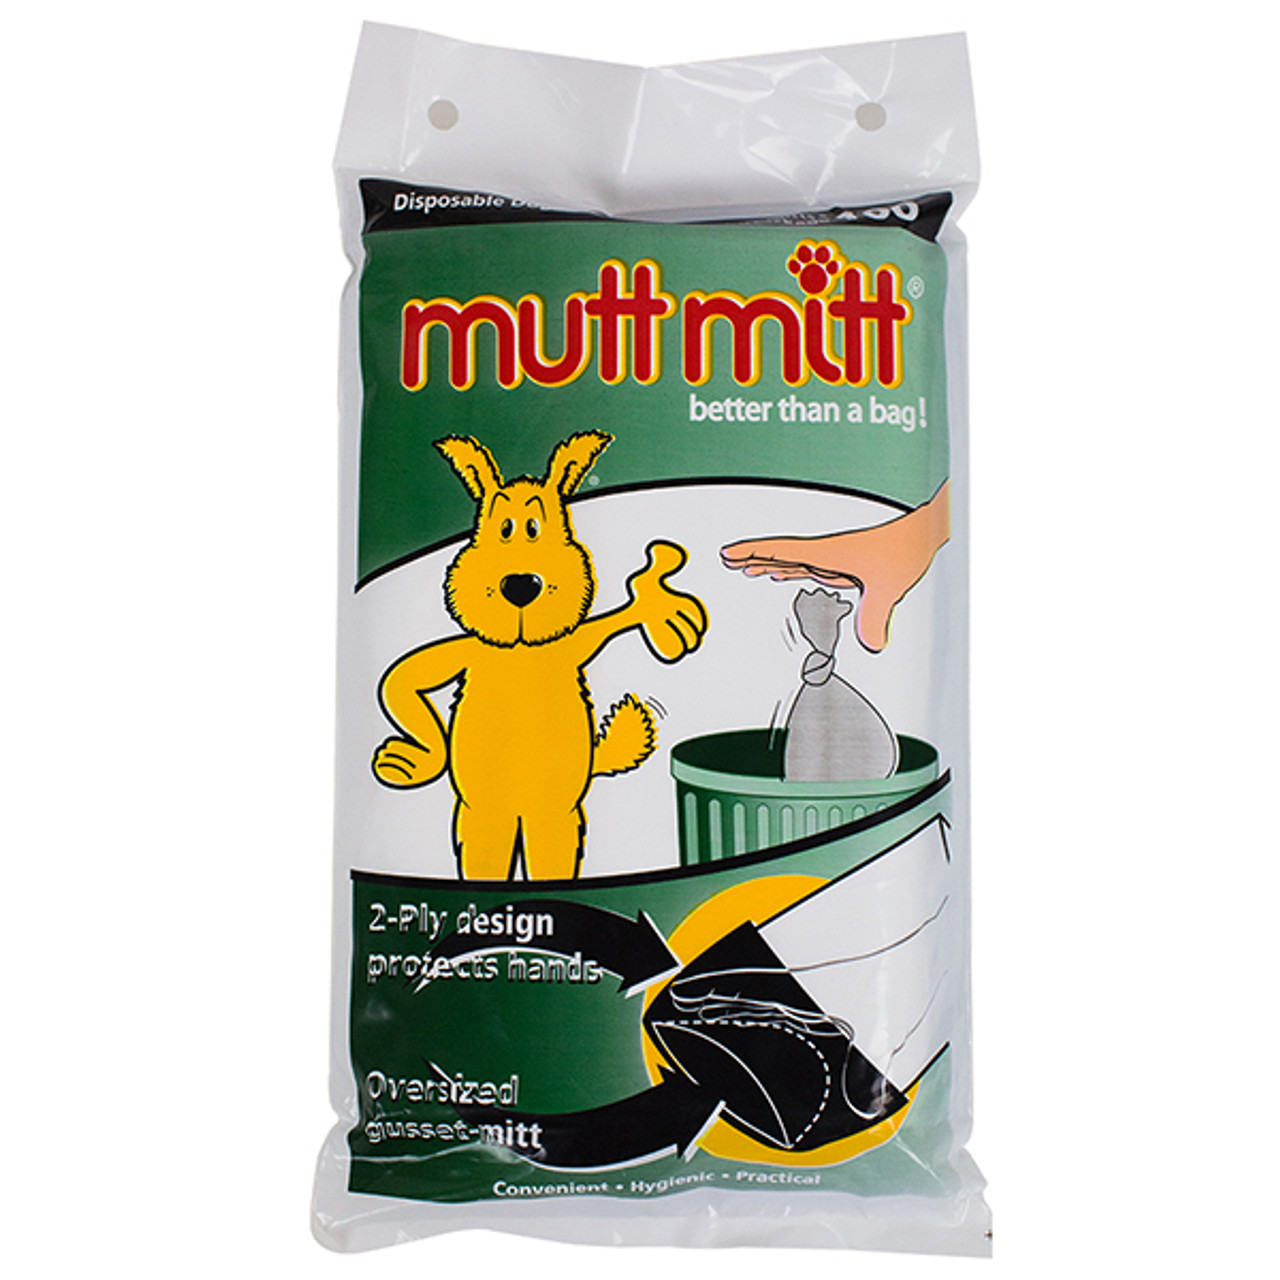  Mutt Mitt 2-ply Dog Waste/Poop Pick Up Bag on hanger cards,  800-count : Pet Supplies